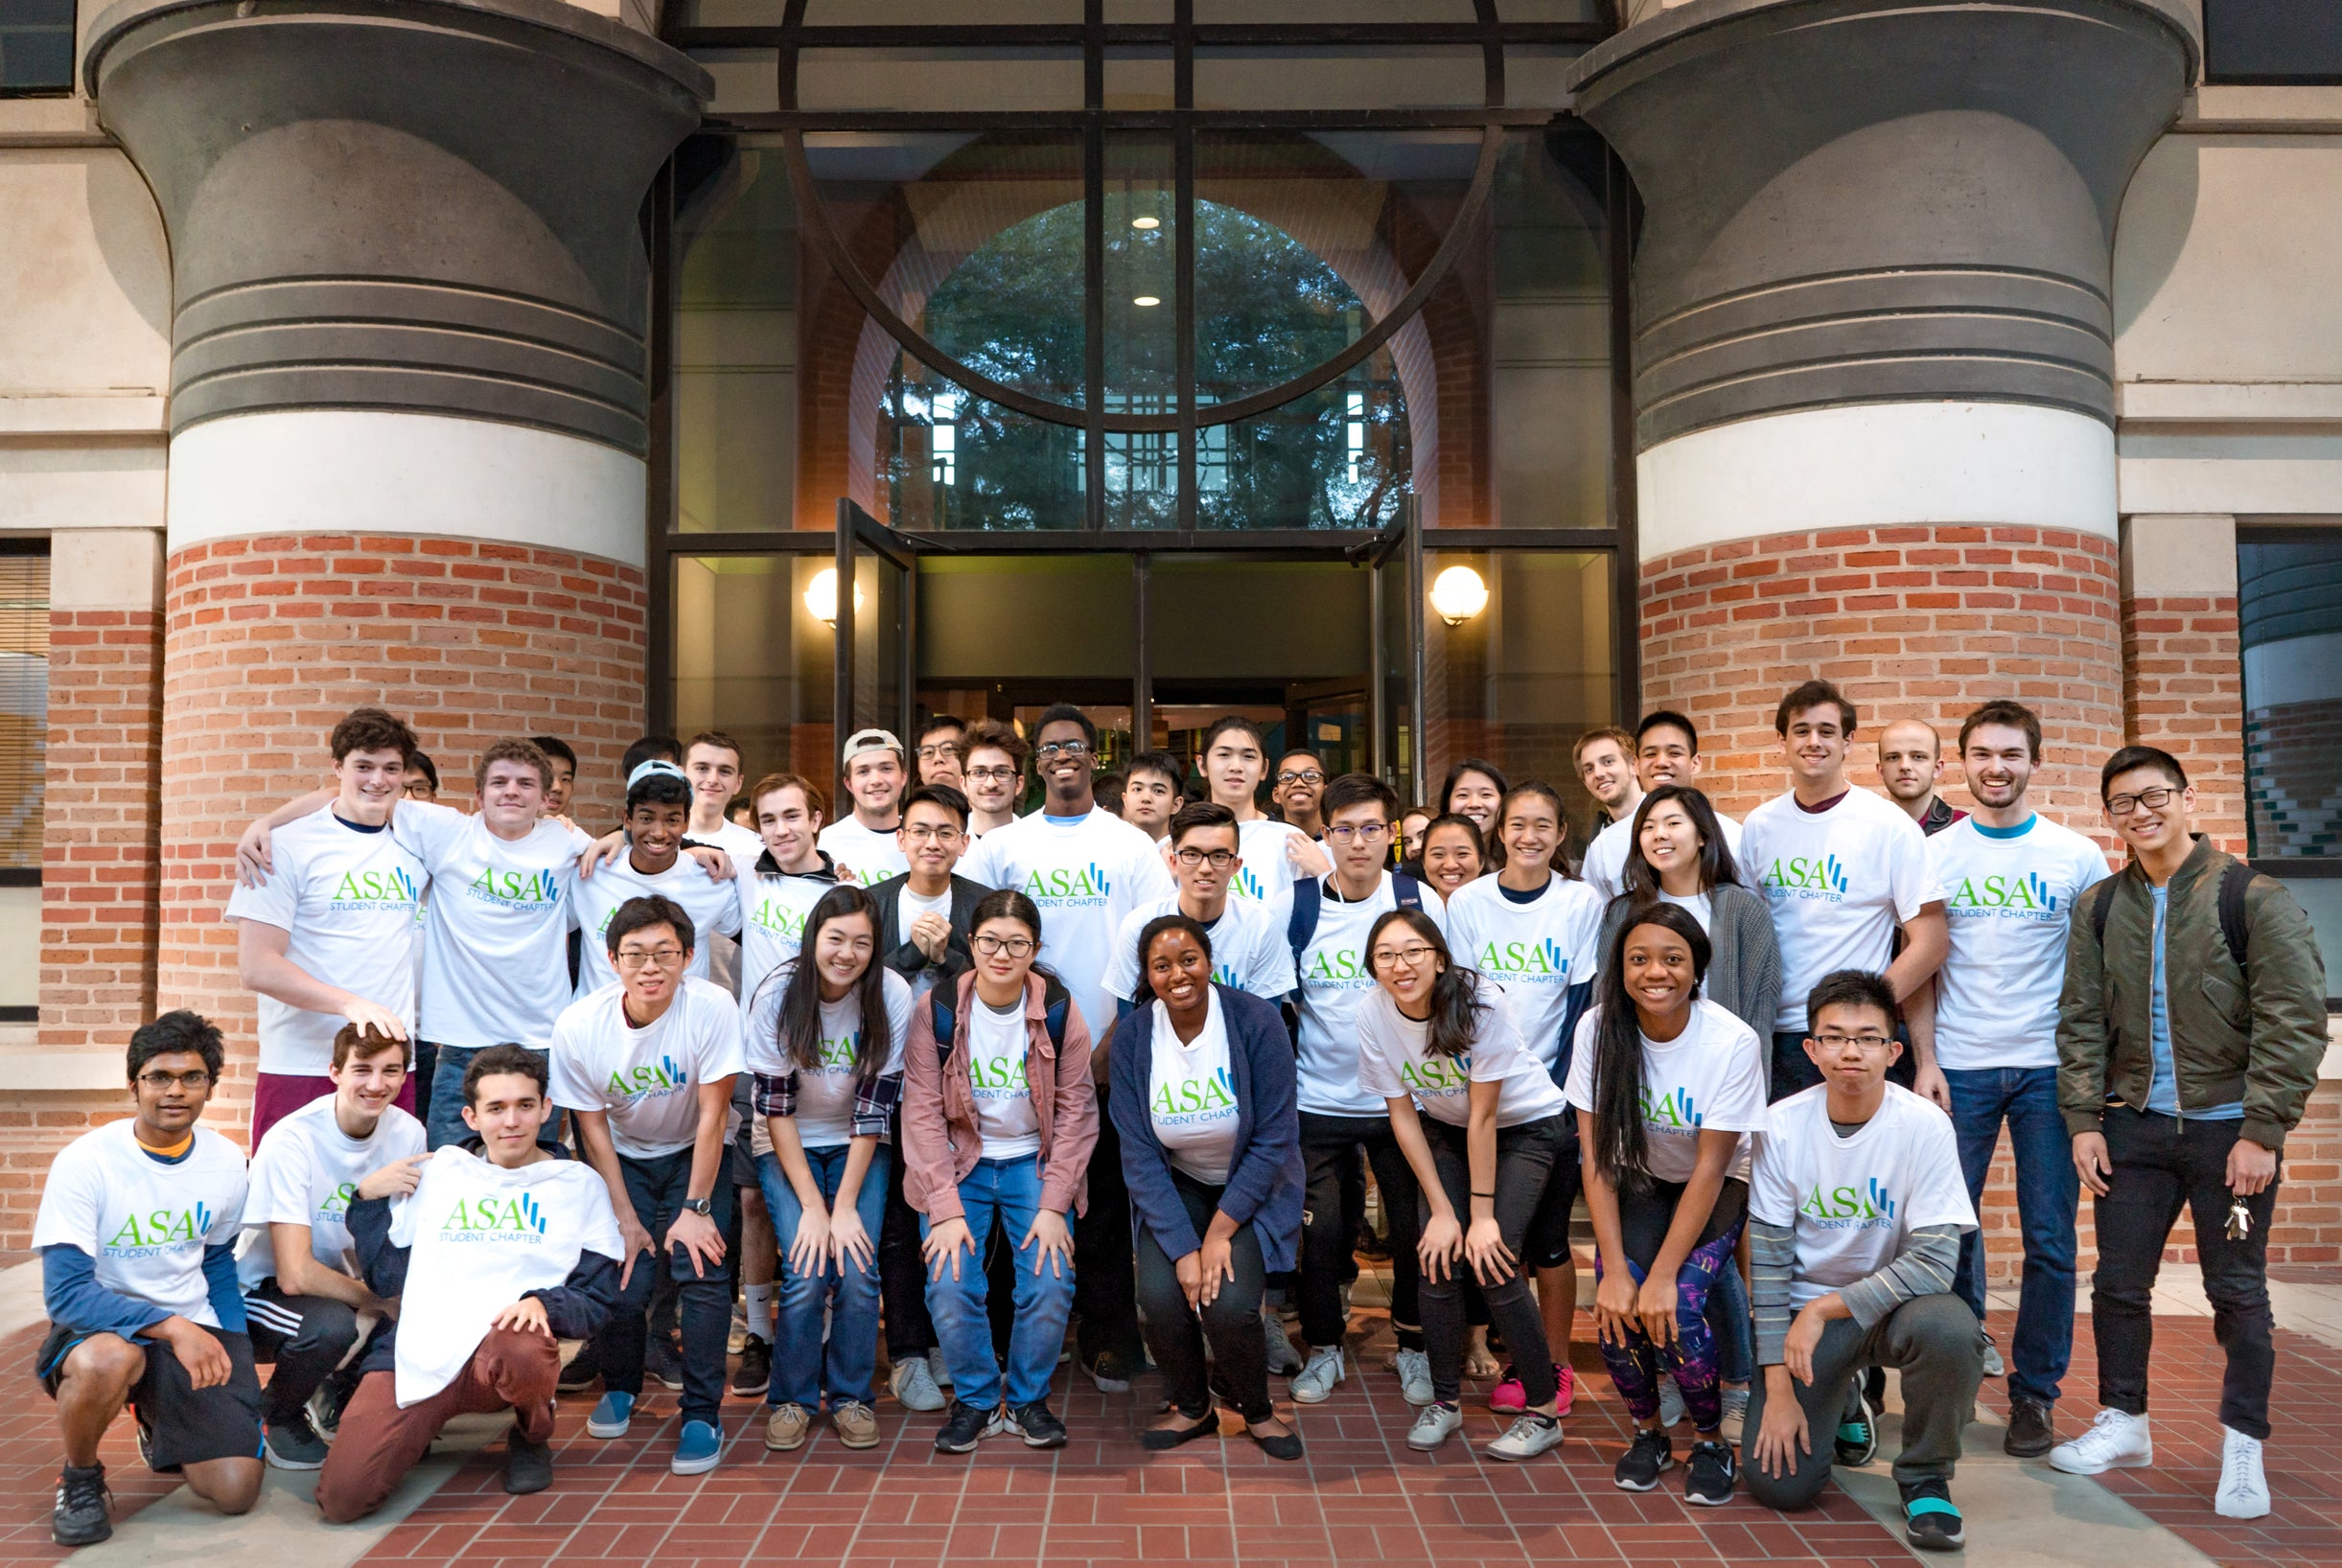 Rice student groups data science